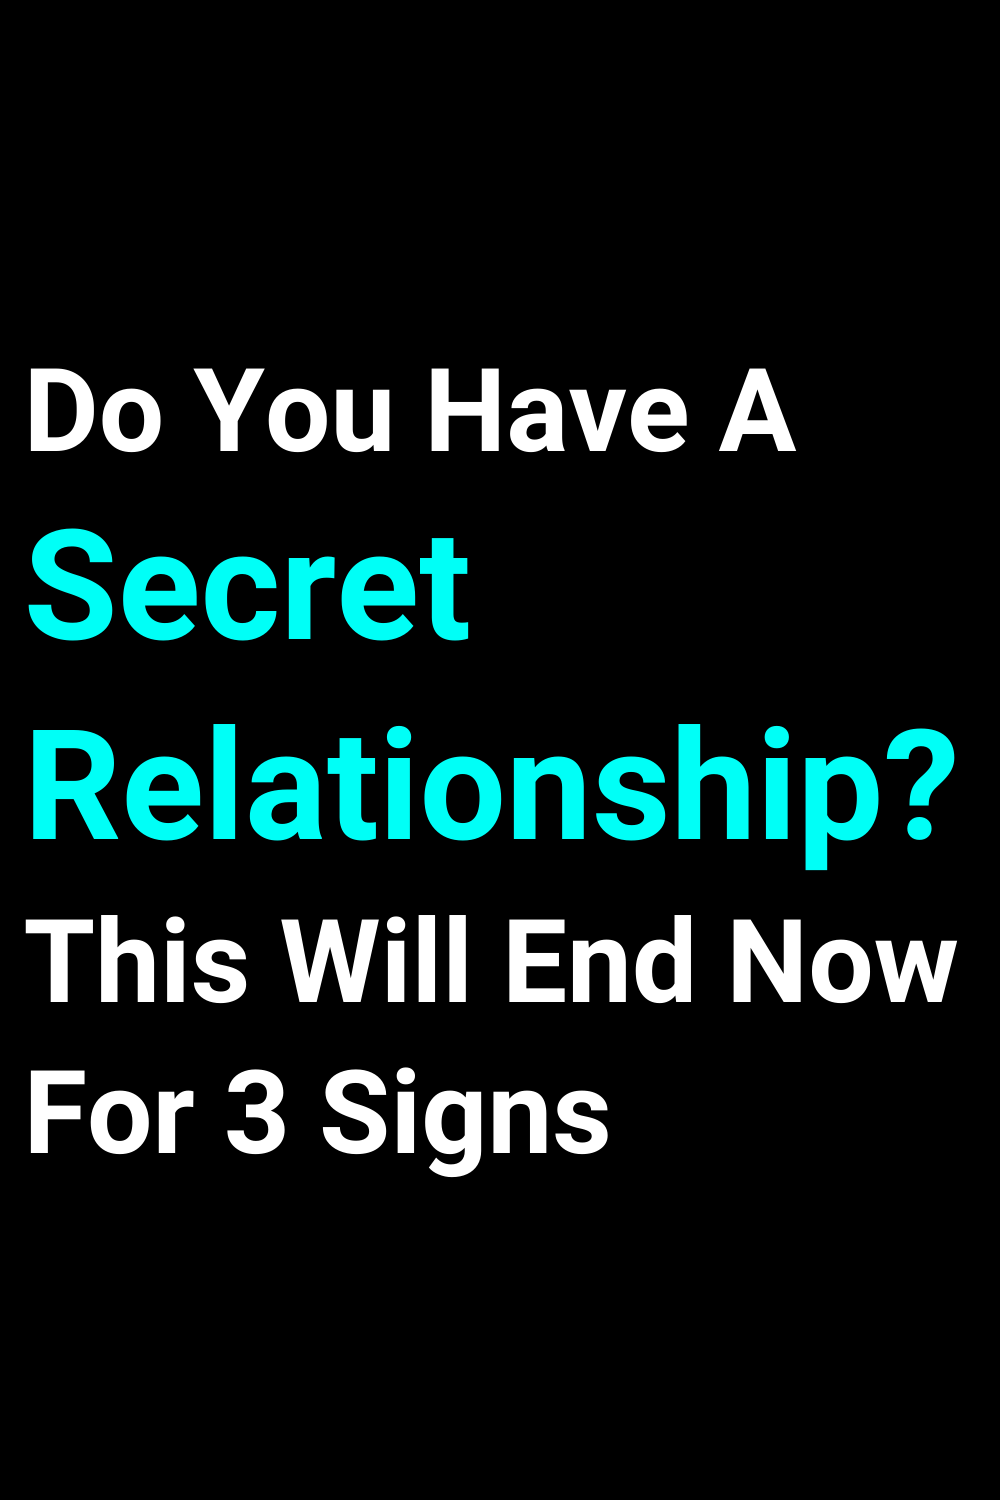 Do You Have A Secret Relationship? This Will End Now For 3 Signs